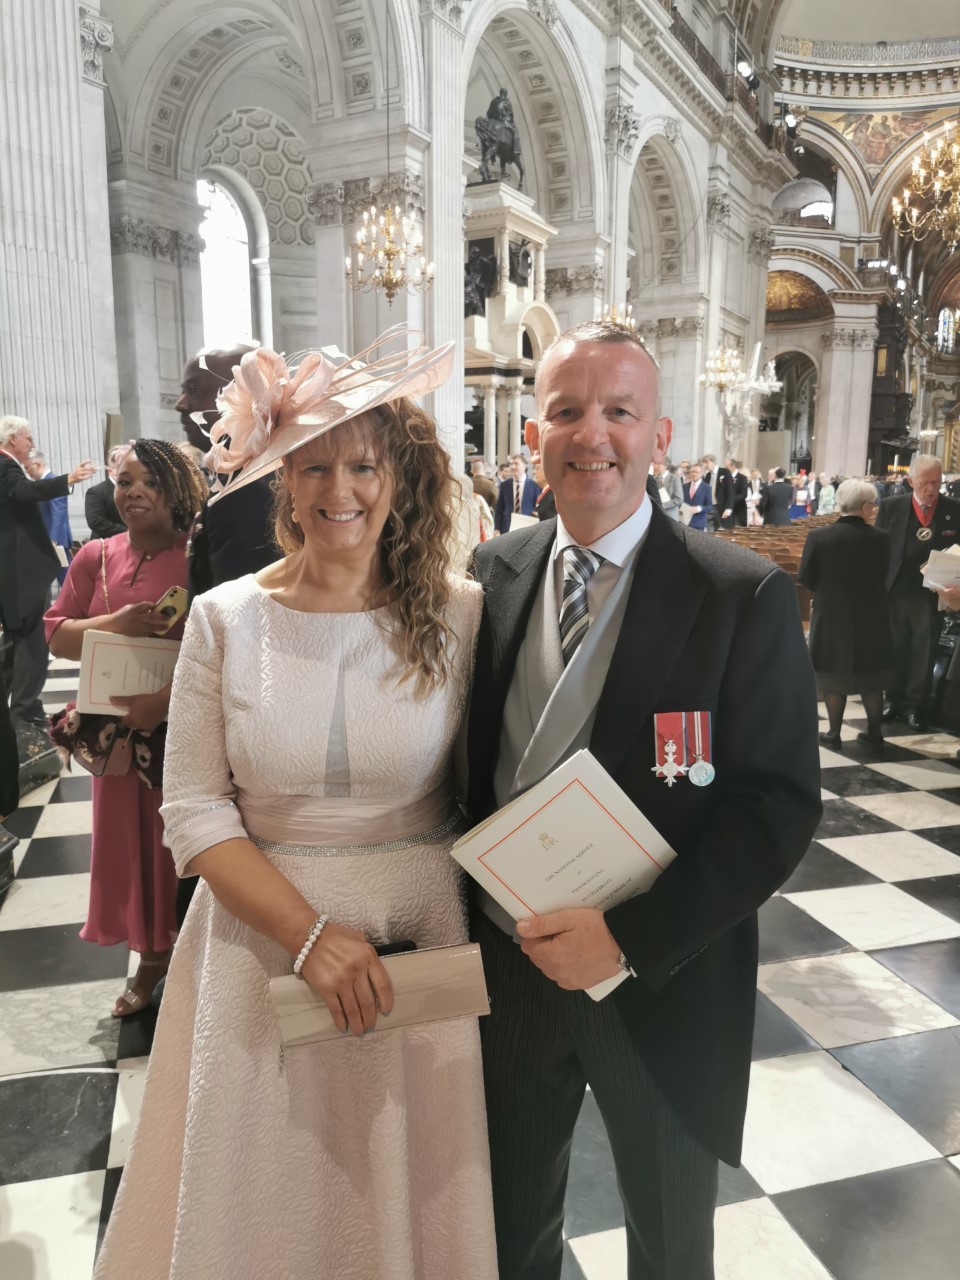 David and Edith Donaldson attended the National Service of Thanksgiving at St. Pauls Cathedral.